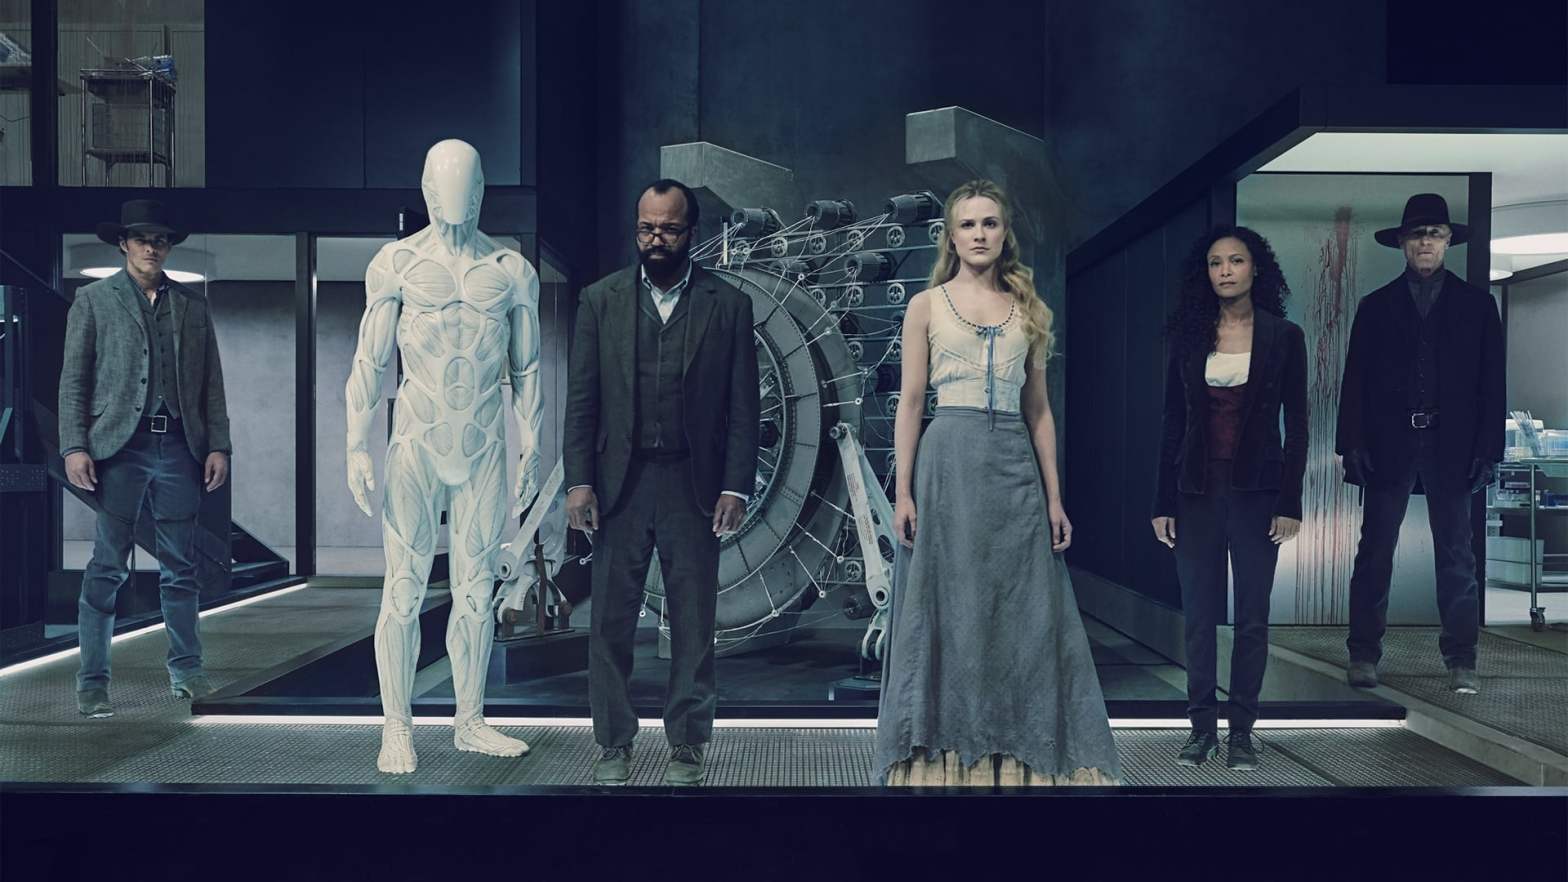 Westworld: the futility of being a player in a rigged (systemic) game